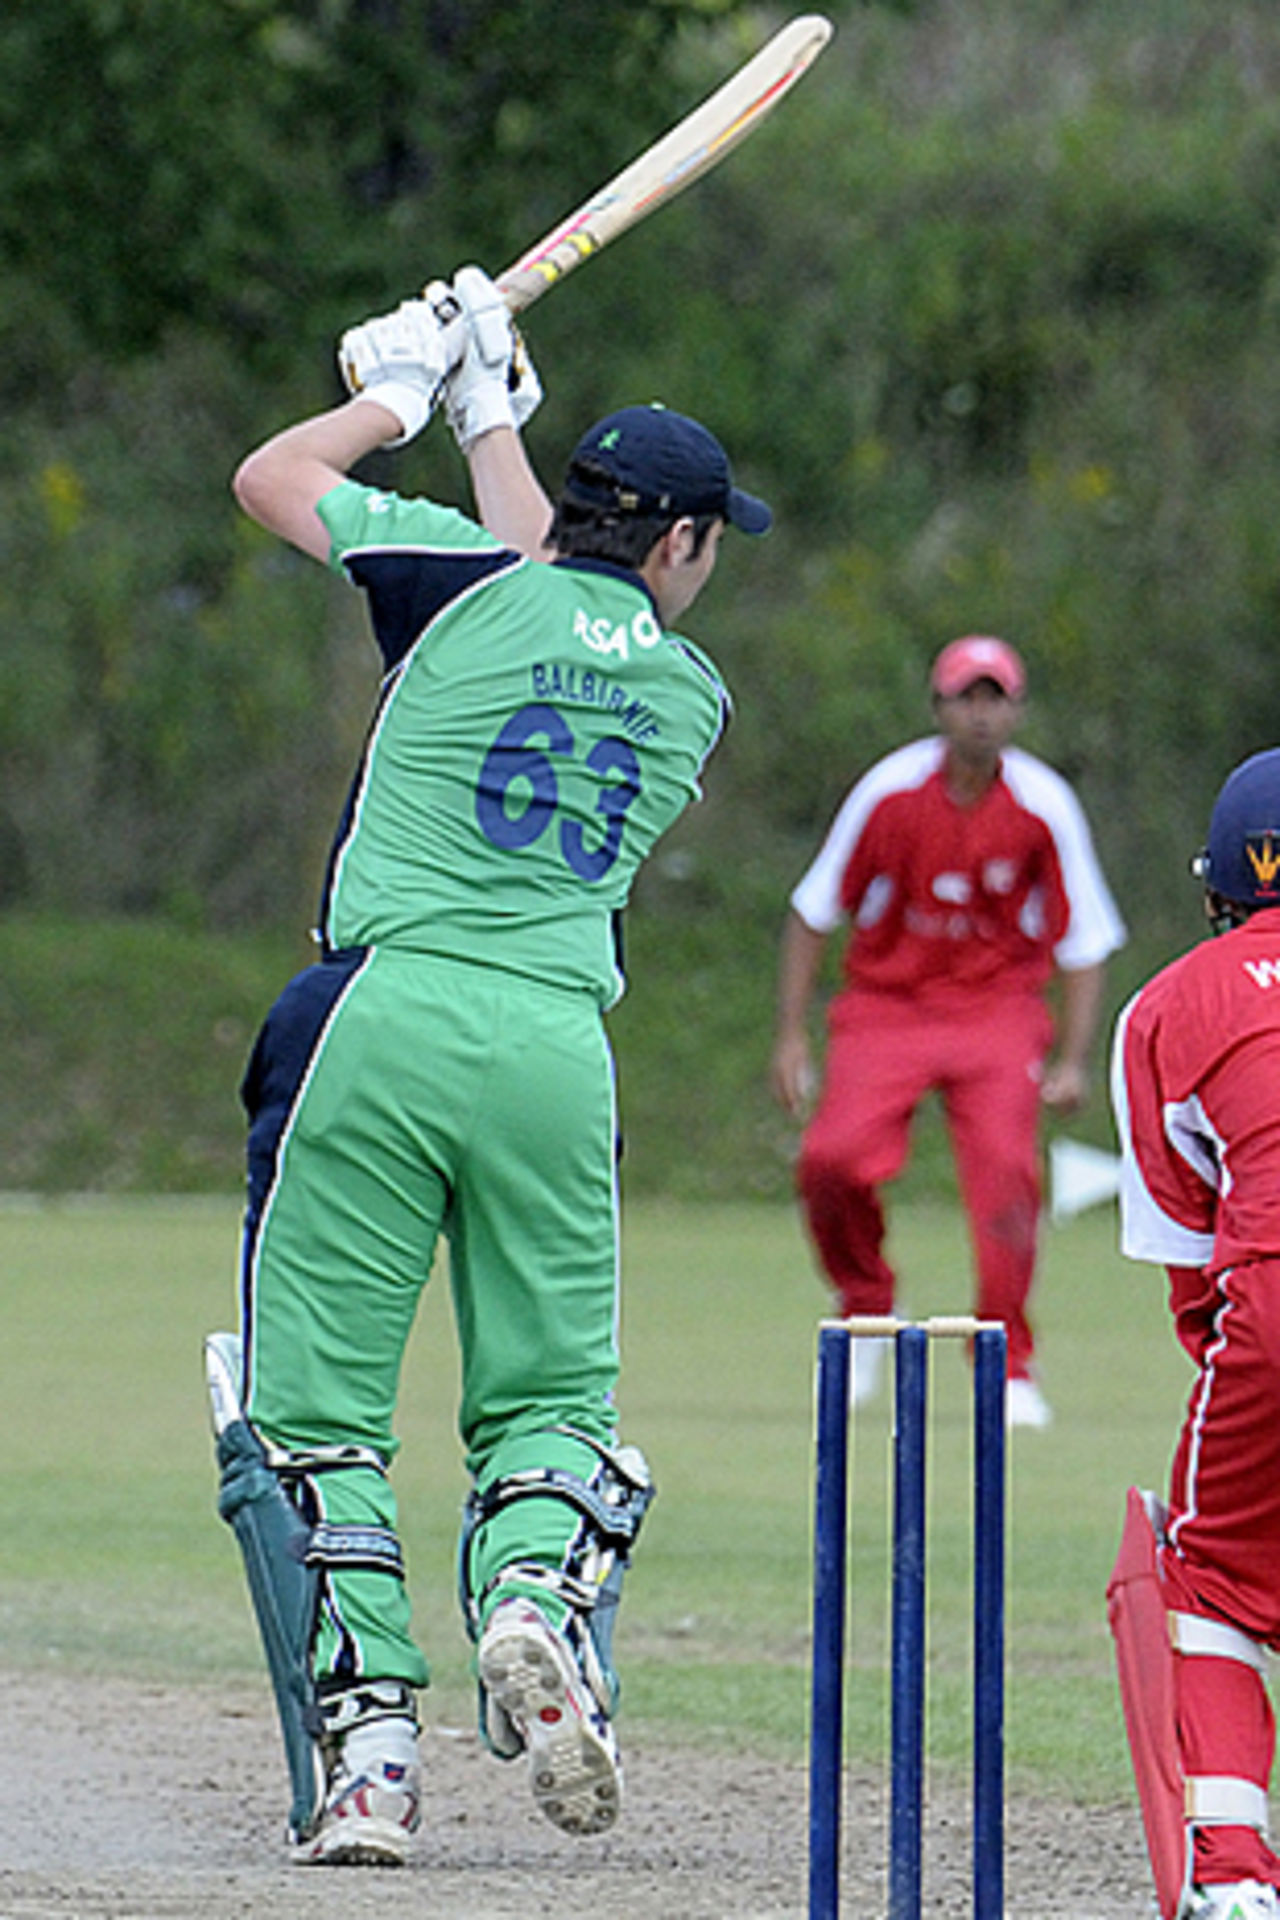 Andrew Balbirnie goes on the offensive, Hong Kong Under-19s v Ireland Under-19s, ICC Under-19 World Cup Qualifier, King City, September 8, 2009